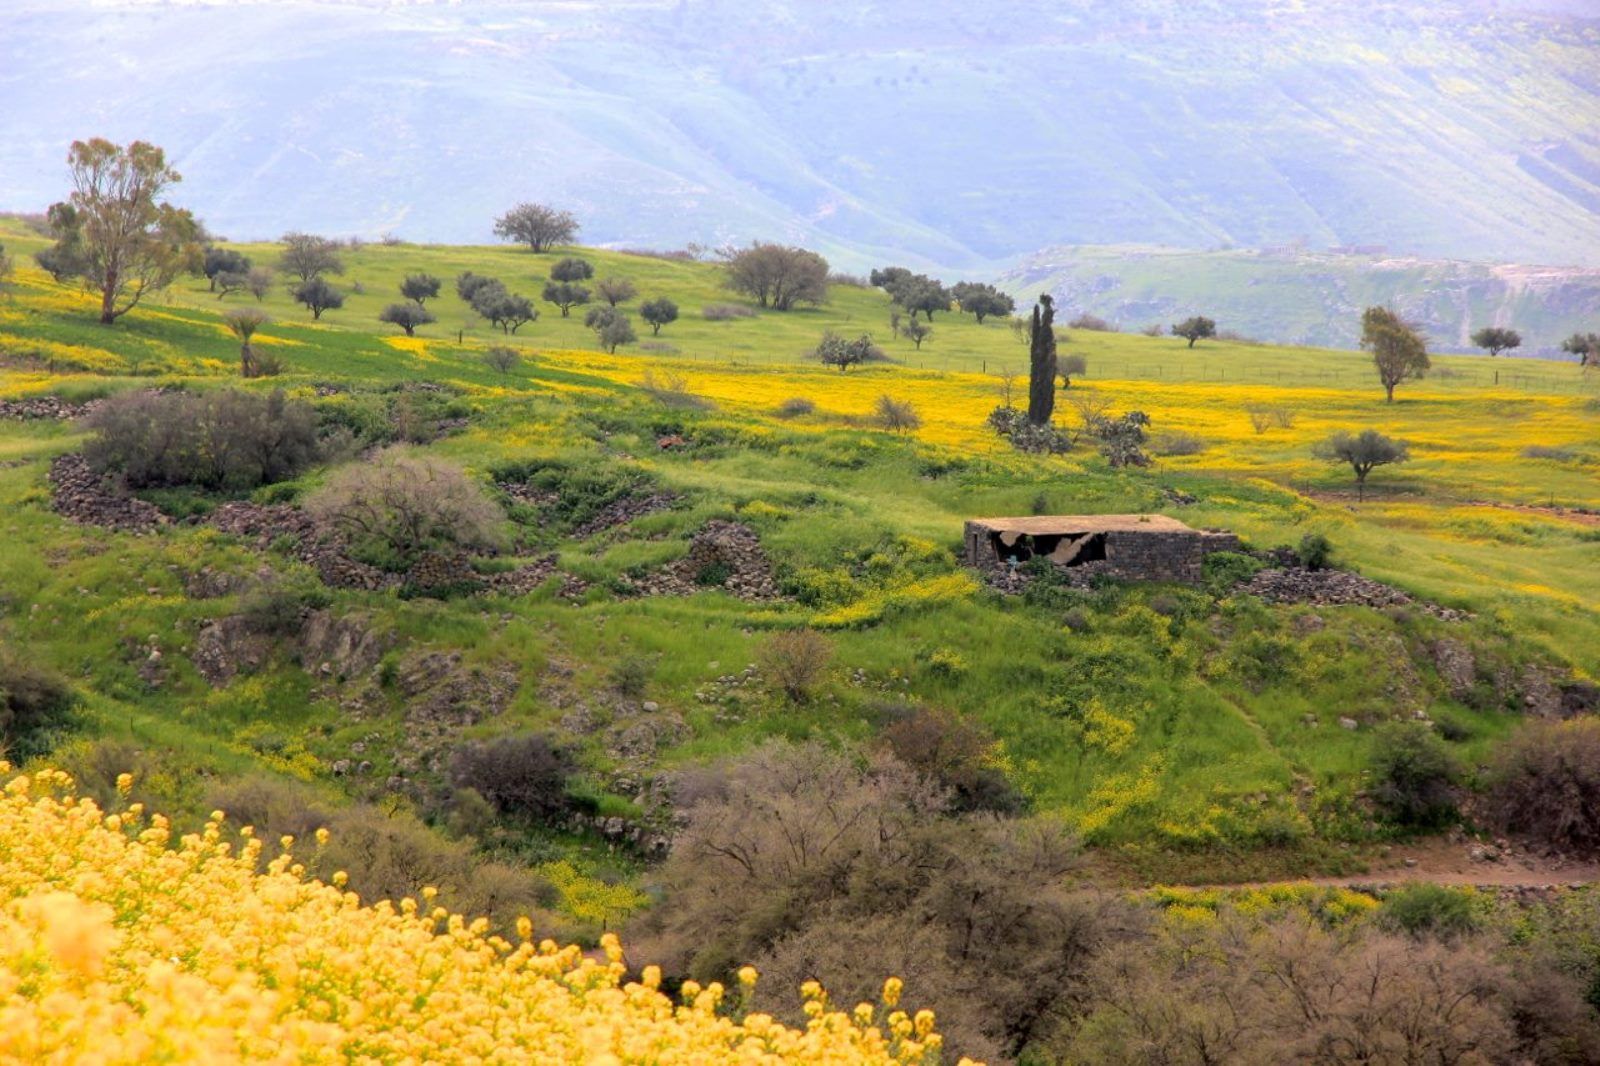 Photo of Golan Trail by Israel Eshed